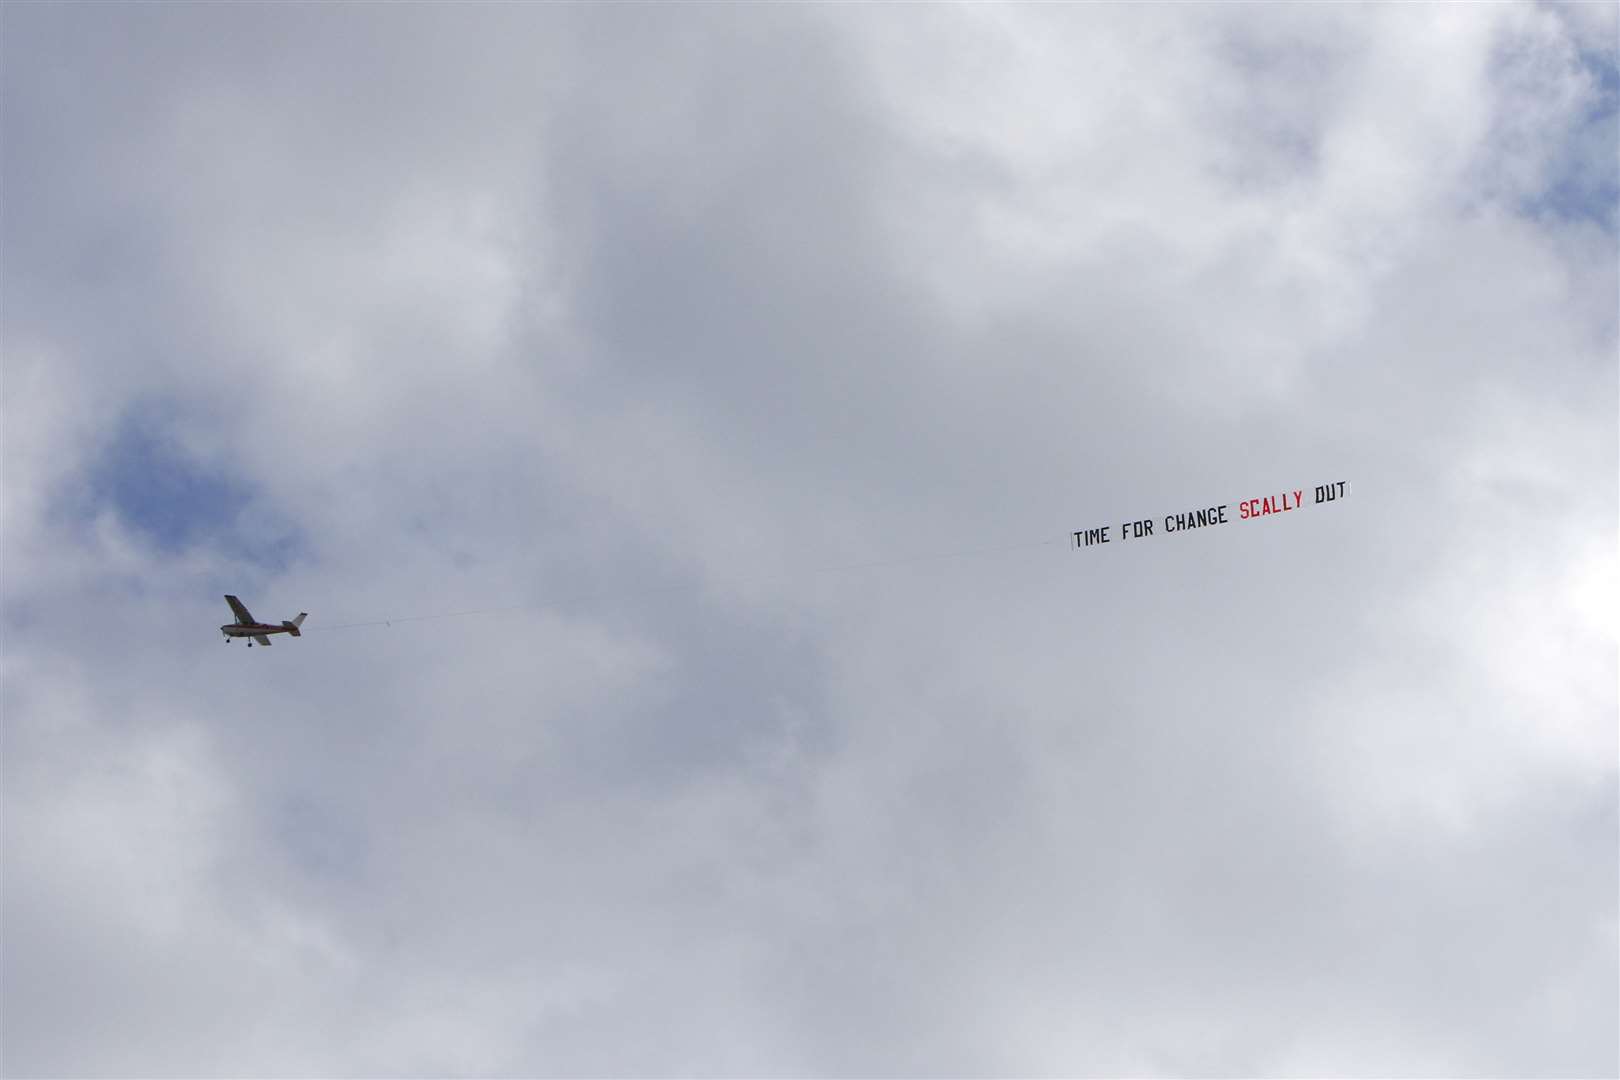 A light aircraft displaying a banner 'Time for Change Scally Out' during the first half against Sunderland Picture: Andy Jones